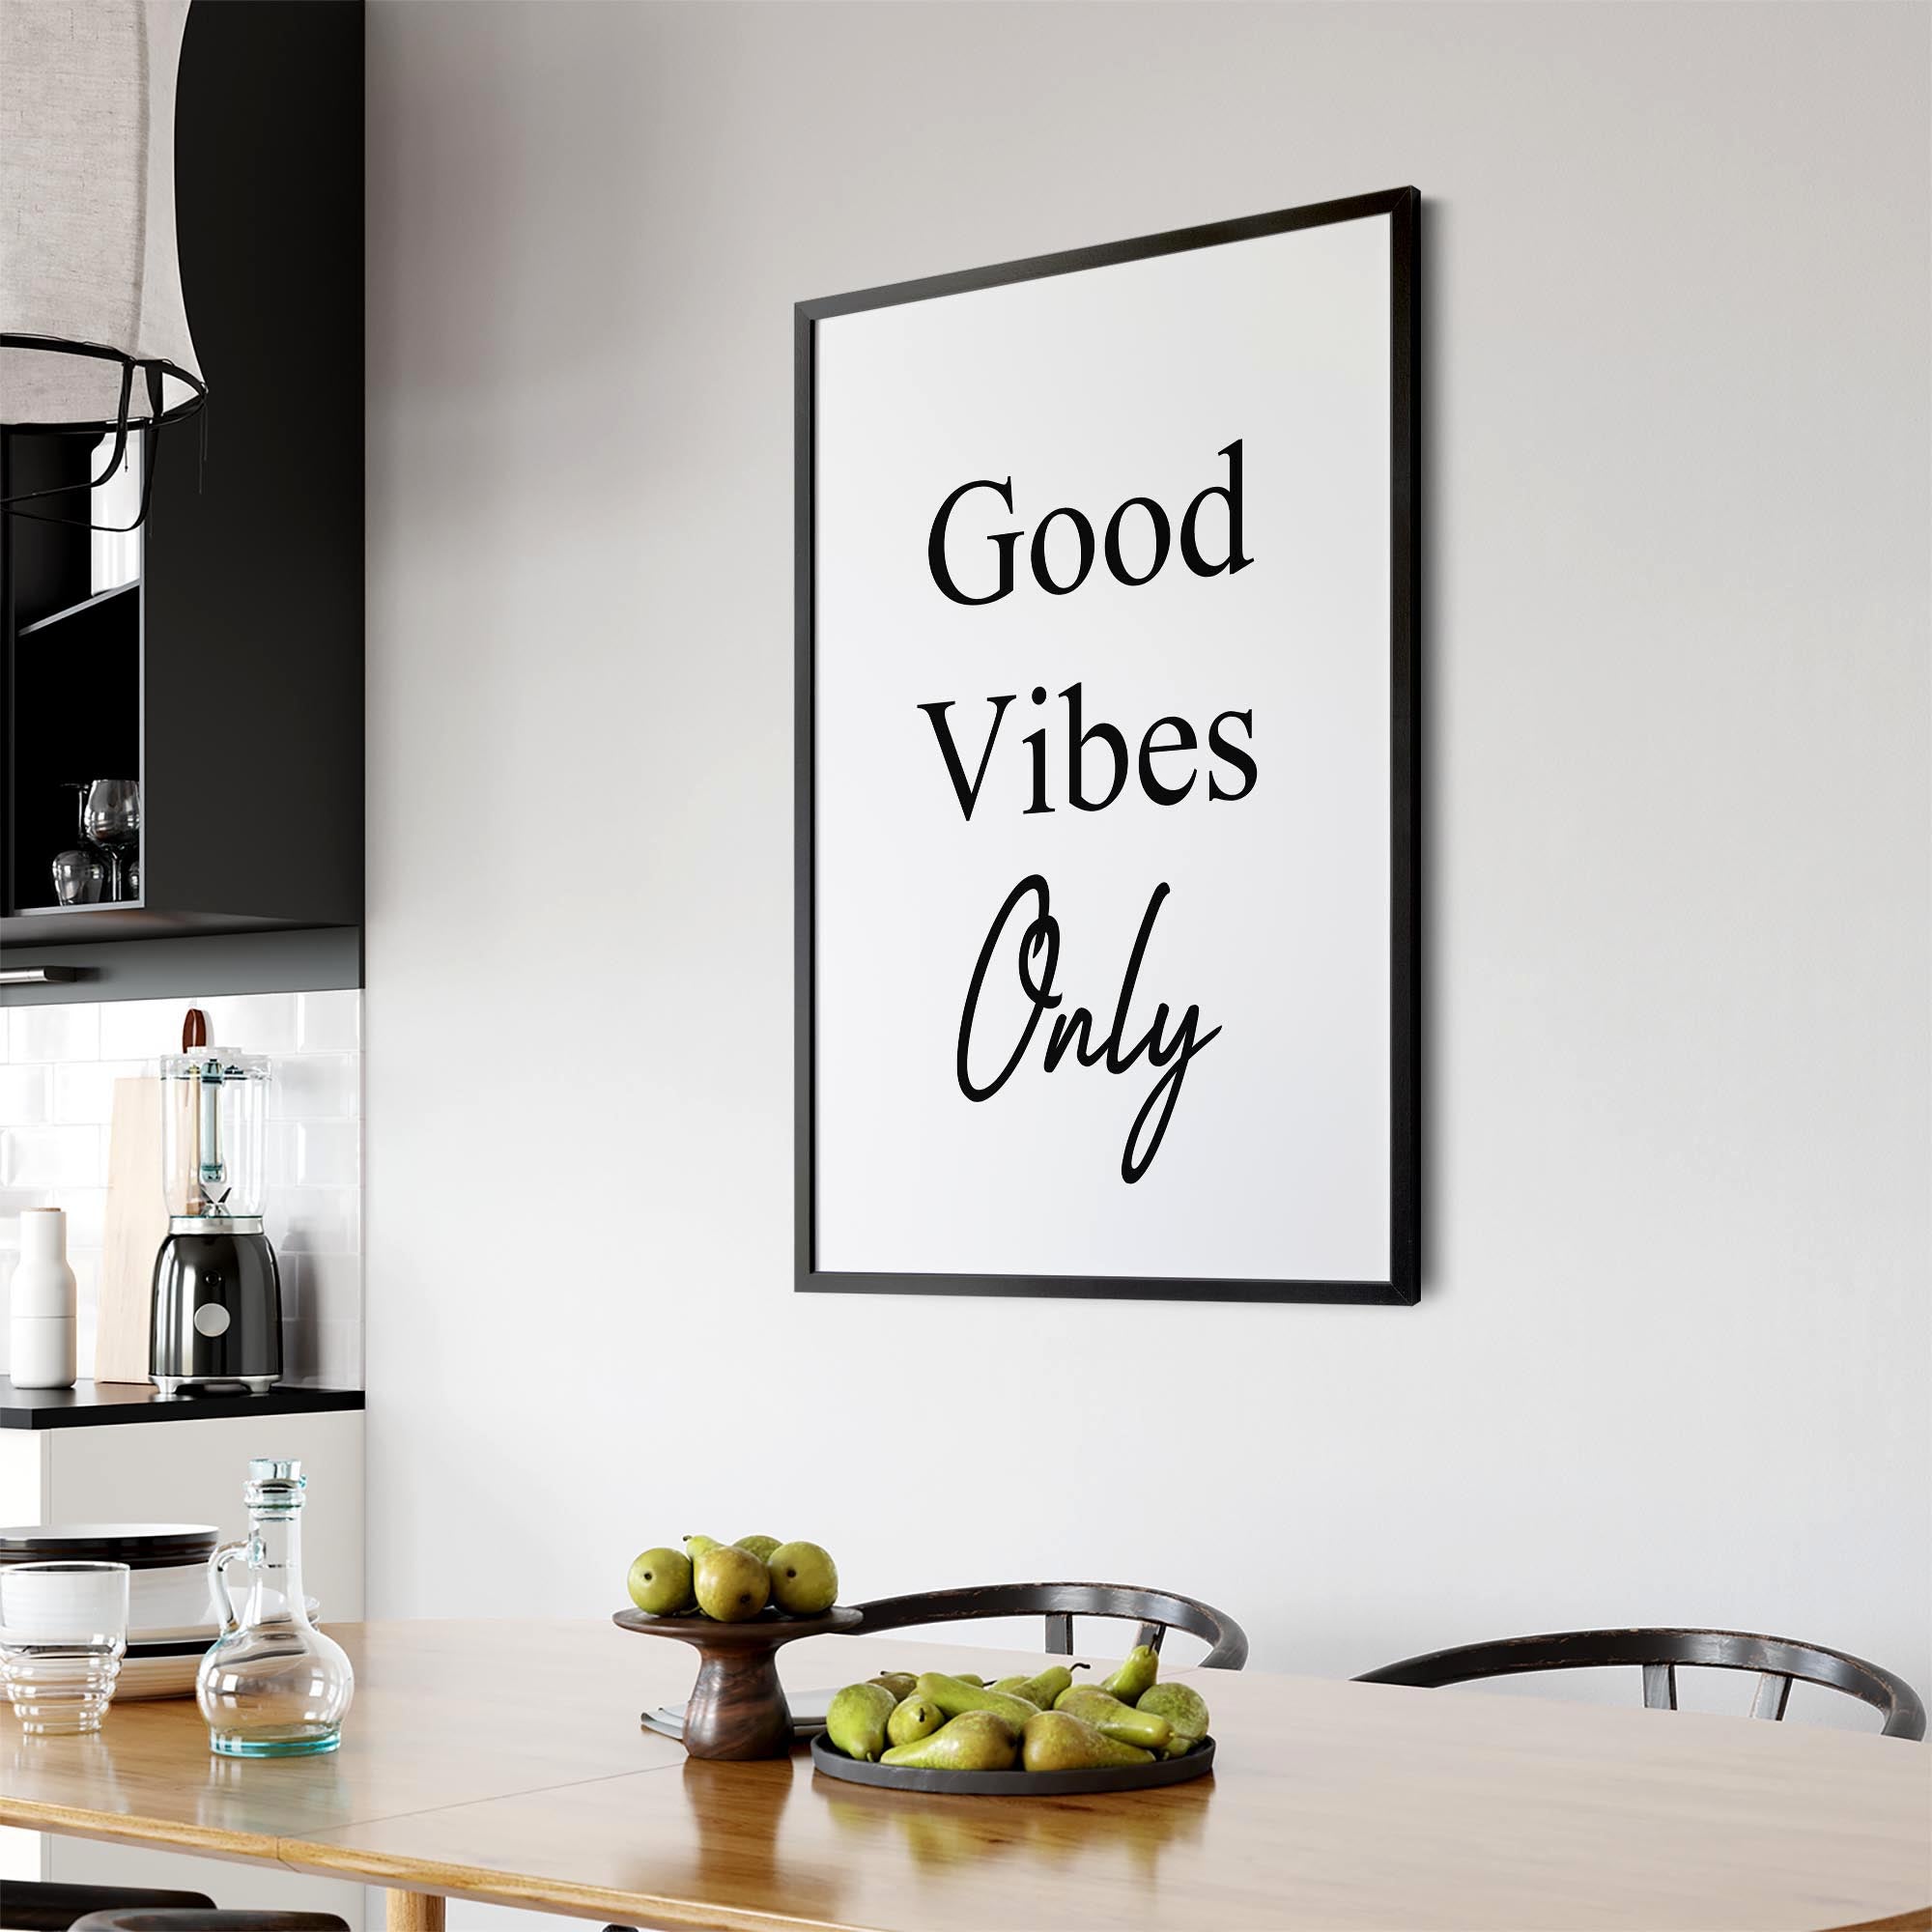 Good Vibes Only - Poster for all rooms